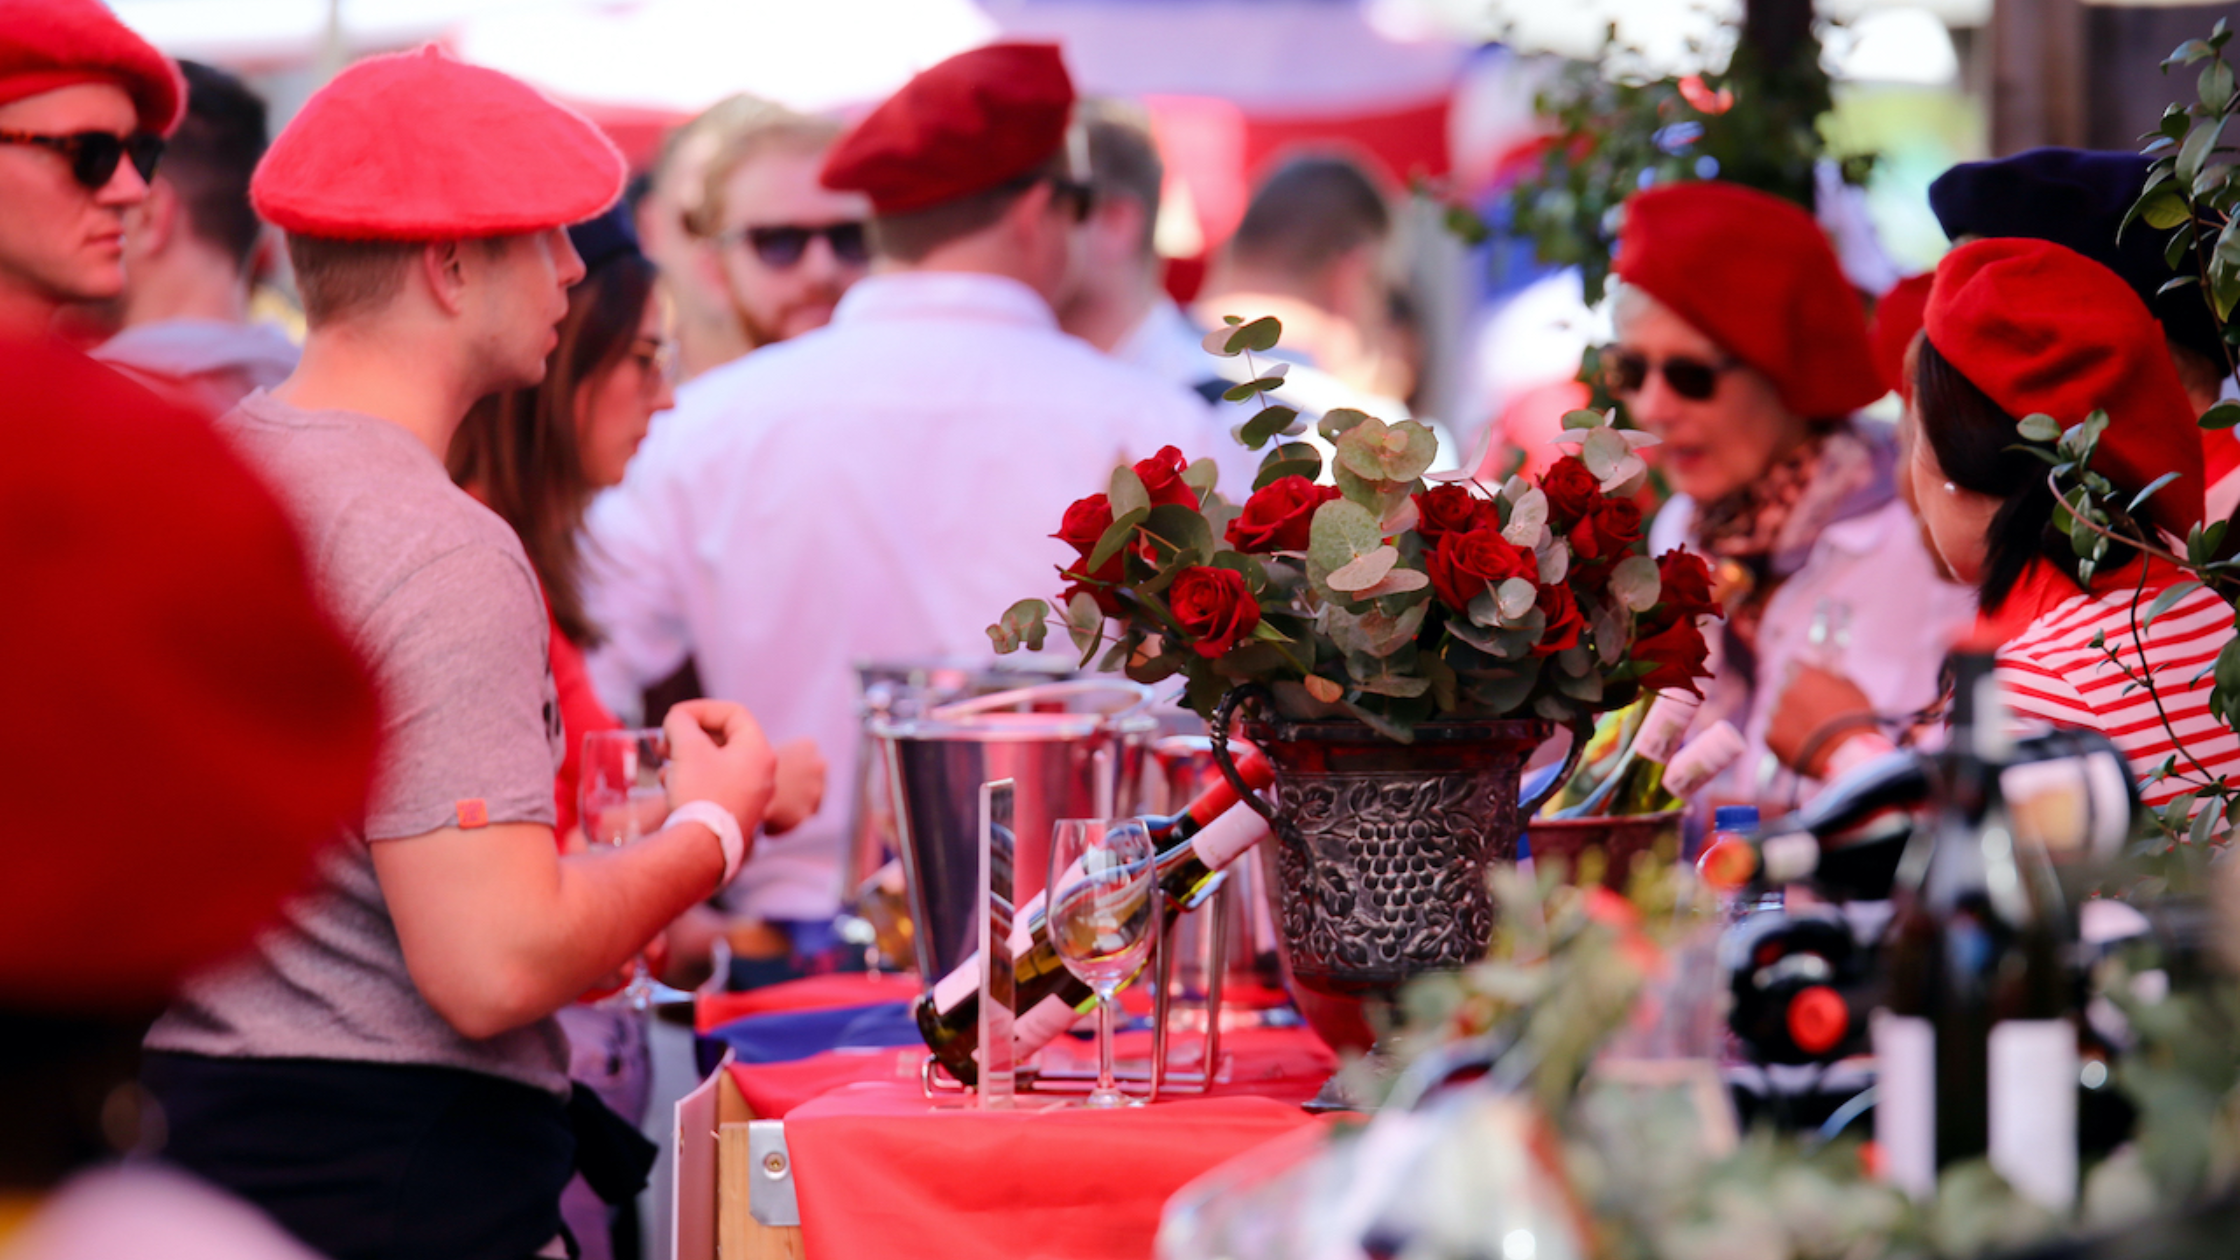 Image of the Bastille festival in Franschoek by Food & Home magazine